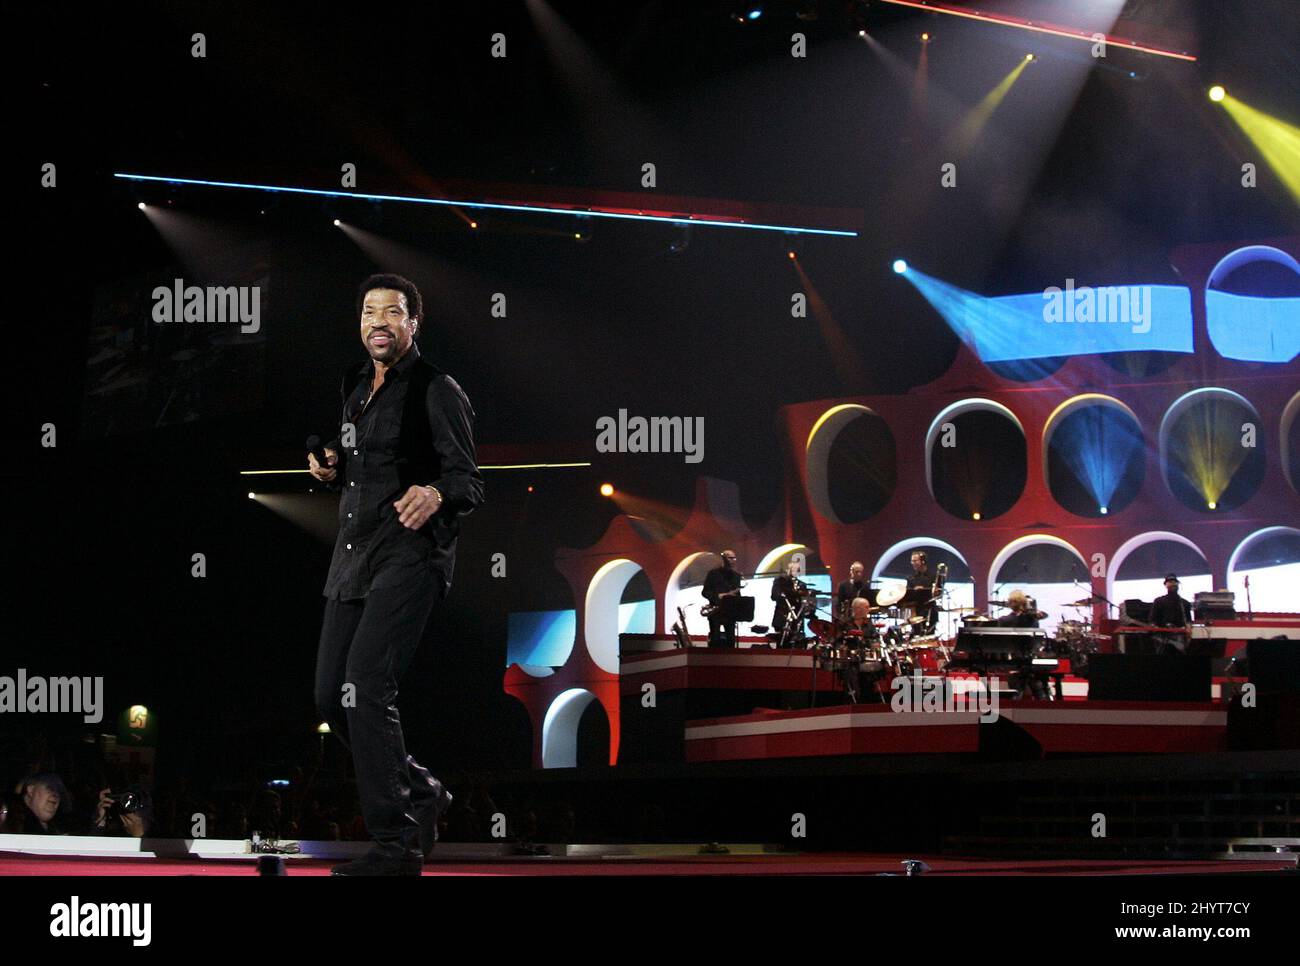 Lionel Richie performs live for the Symphonica in Rosso concert held at Gelredome Stadium, Arnhem, The Netherlands. Stock Photo